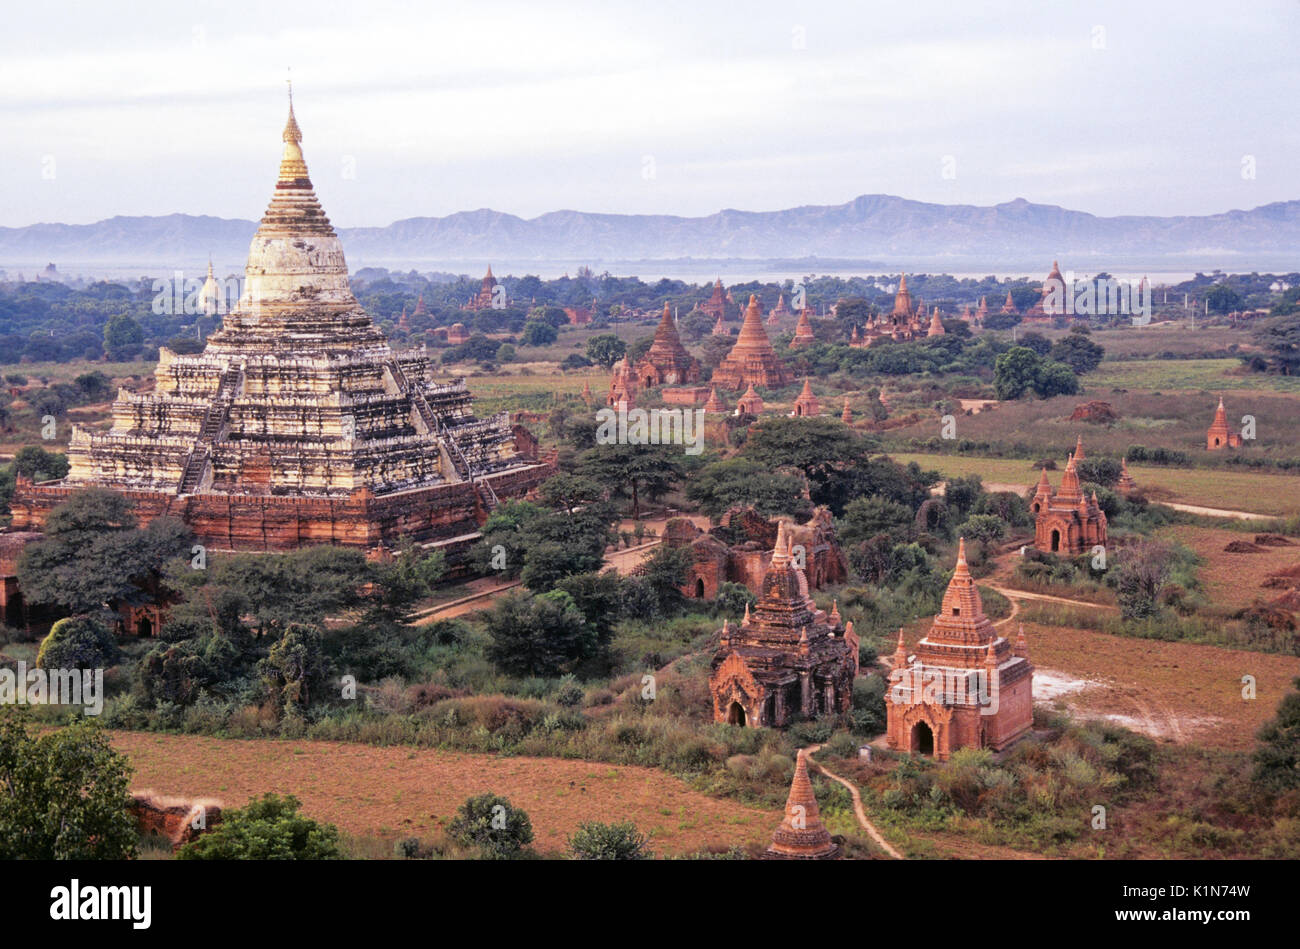 Shwesandaw and ruins of other temples and pagodas on the plain, Pagan (Bagan), Burma (Myanmar) Stock Photo